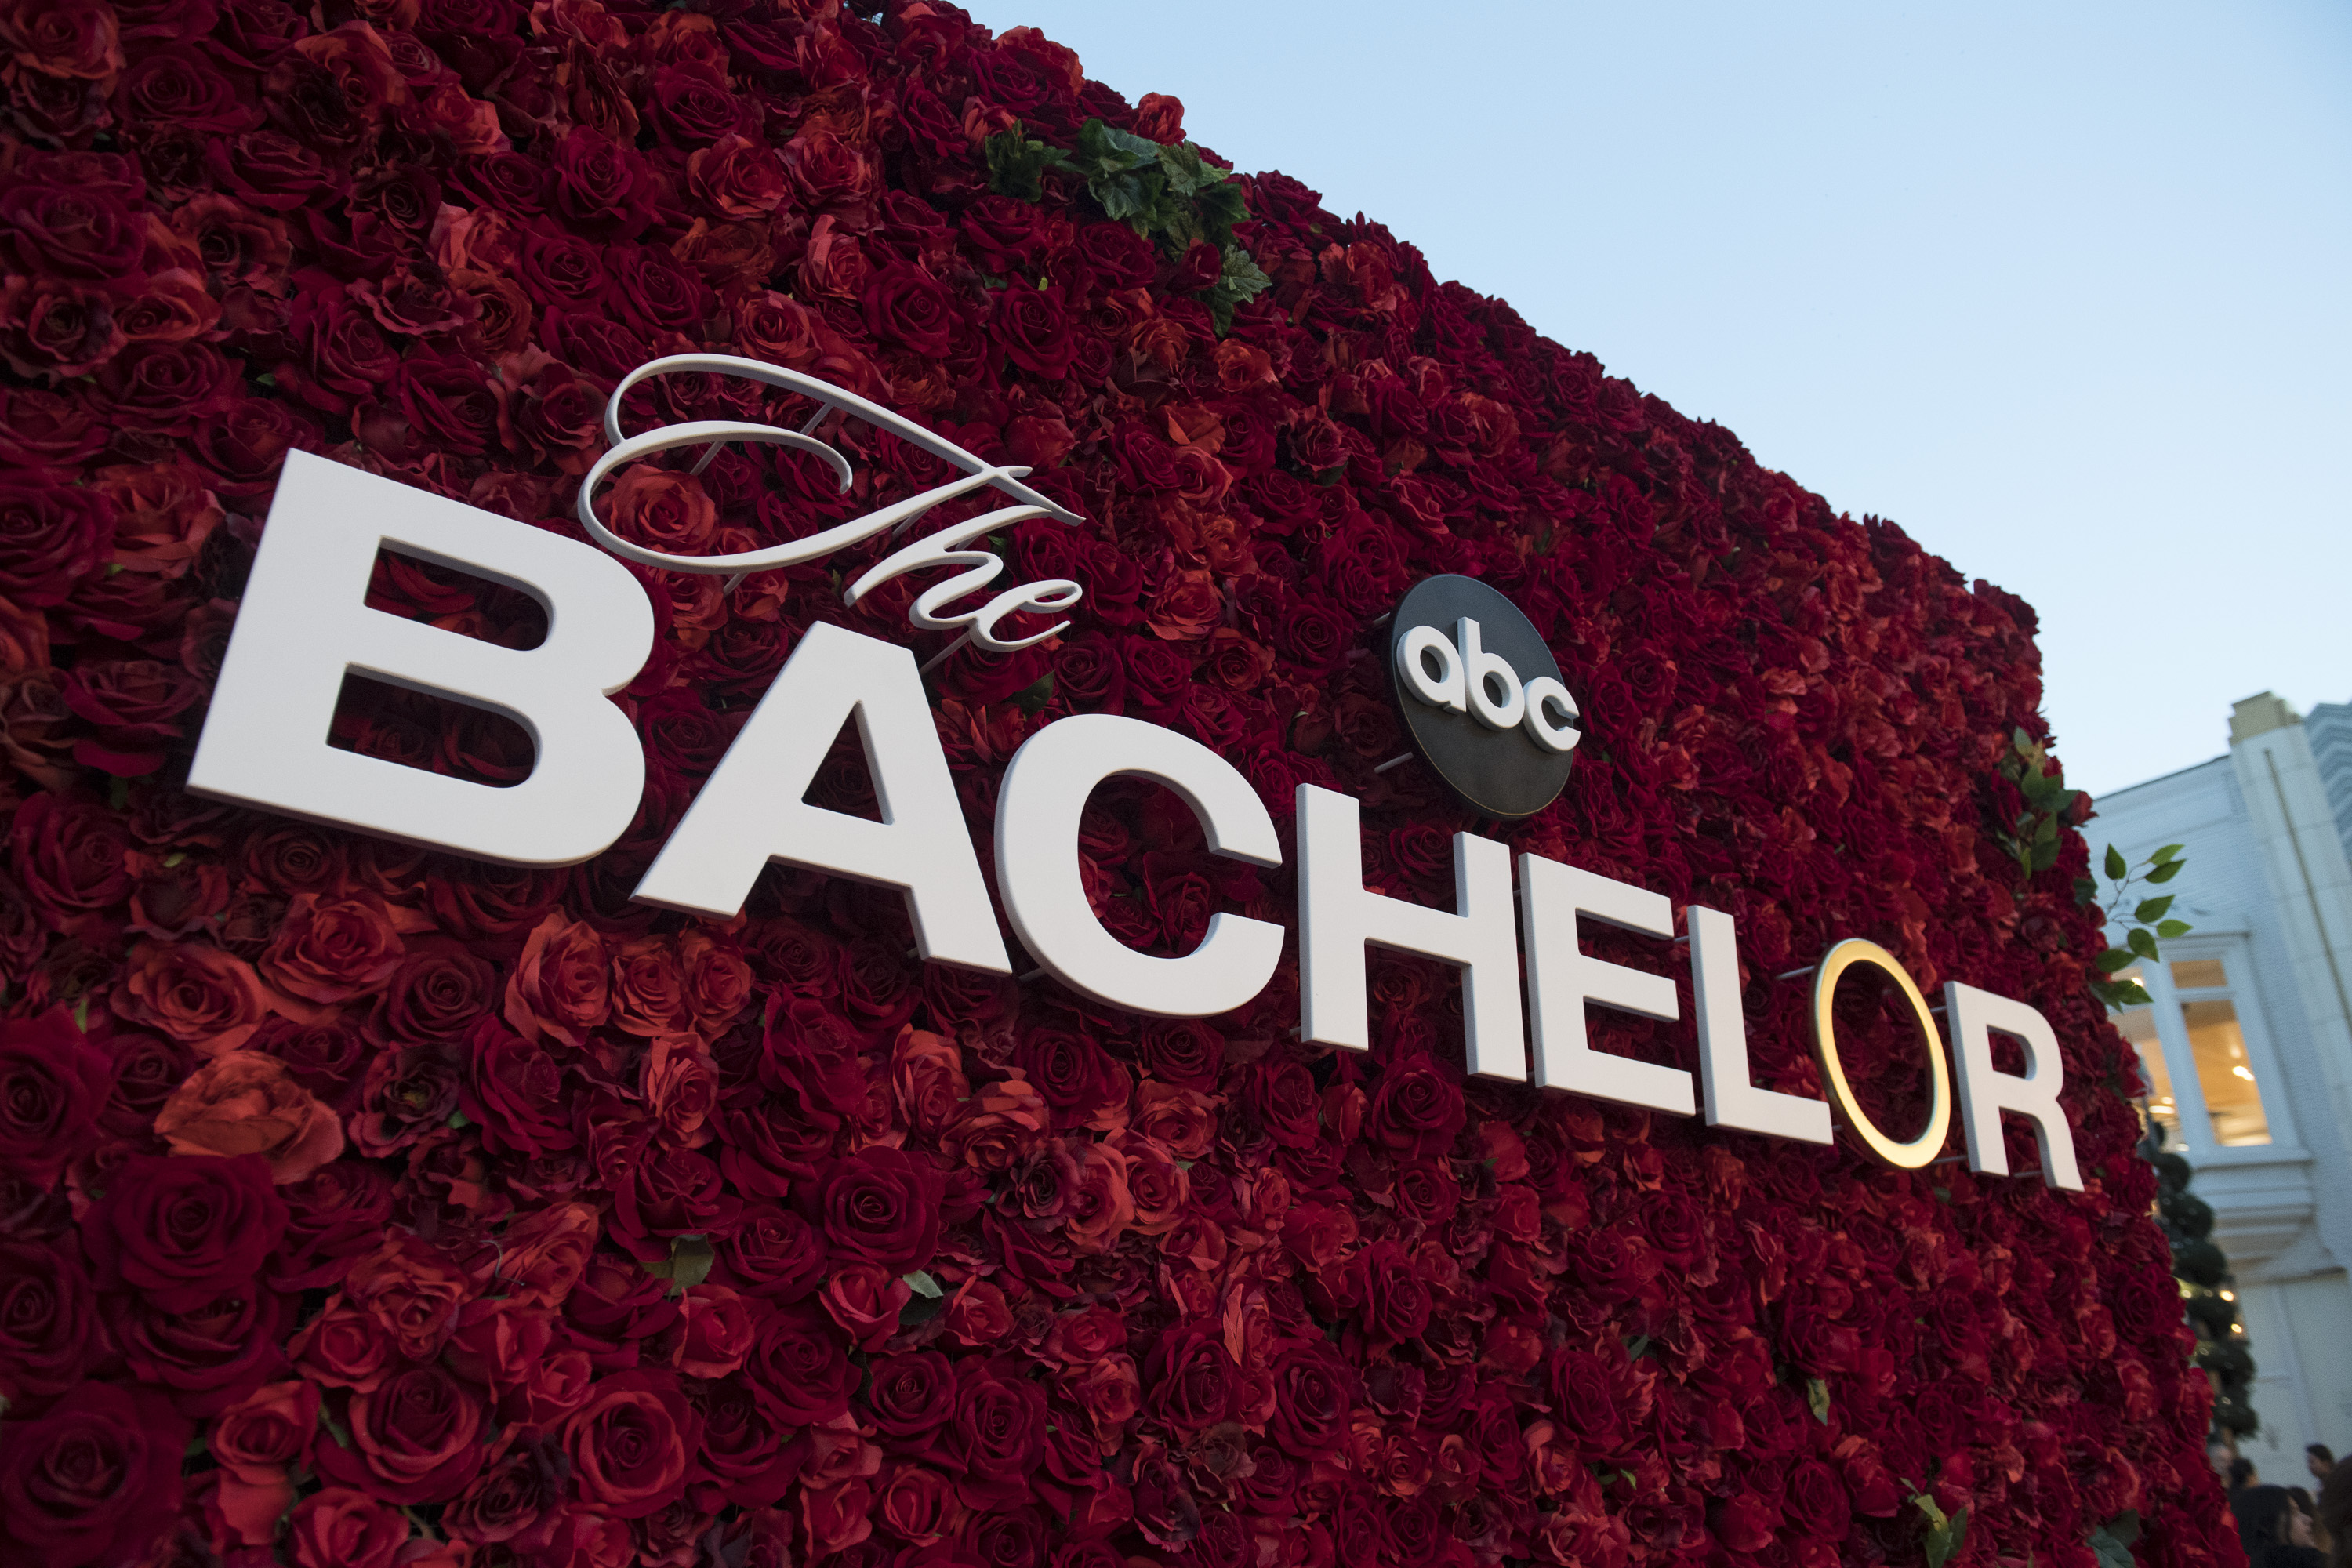 'The Bachelor' logo nestled in a wall of red roses